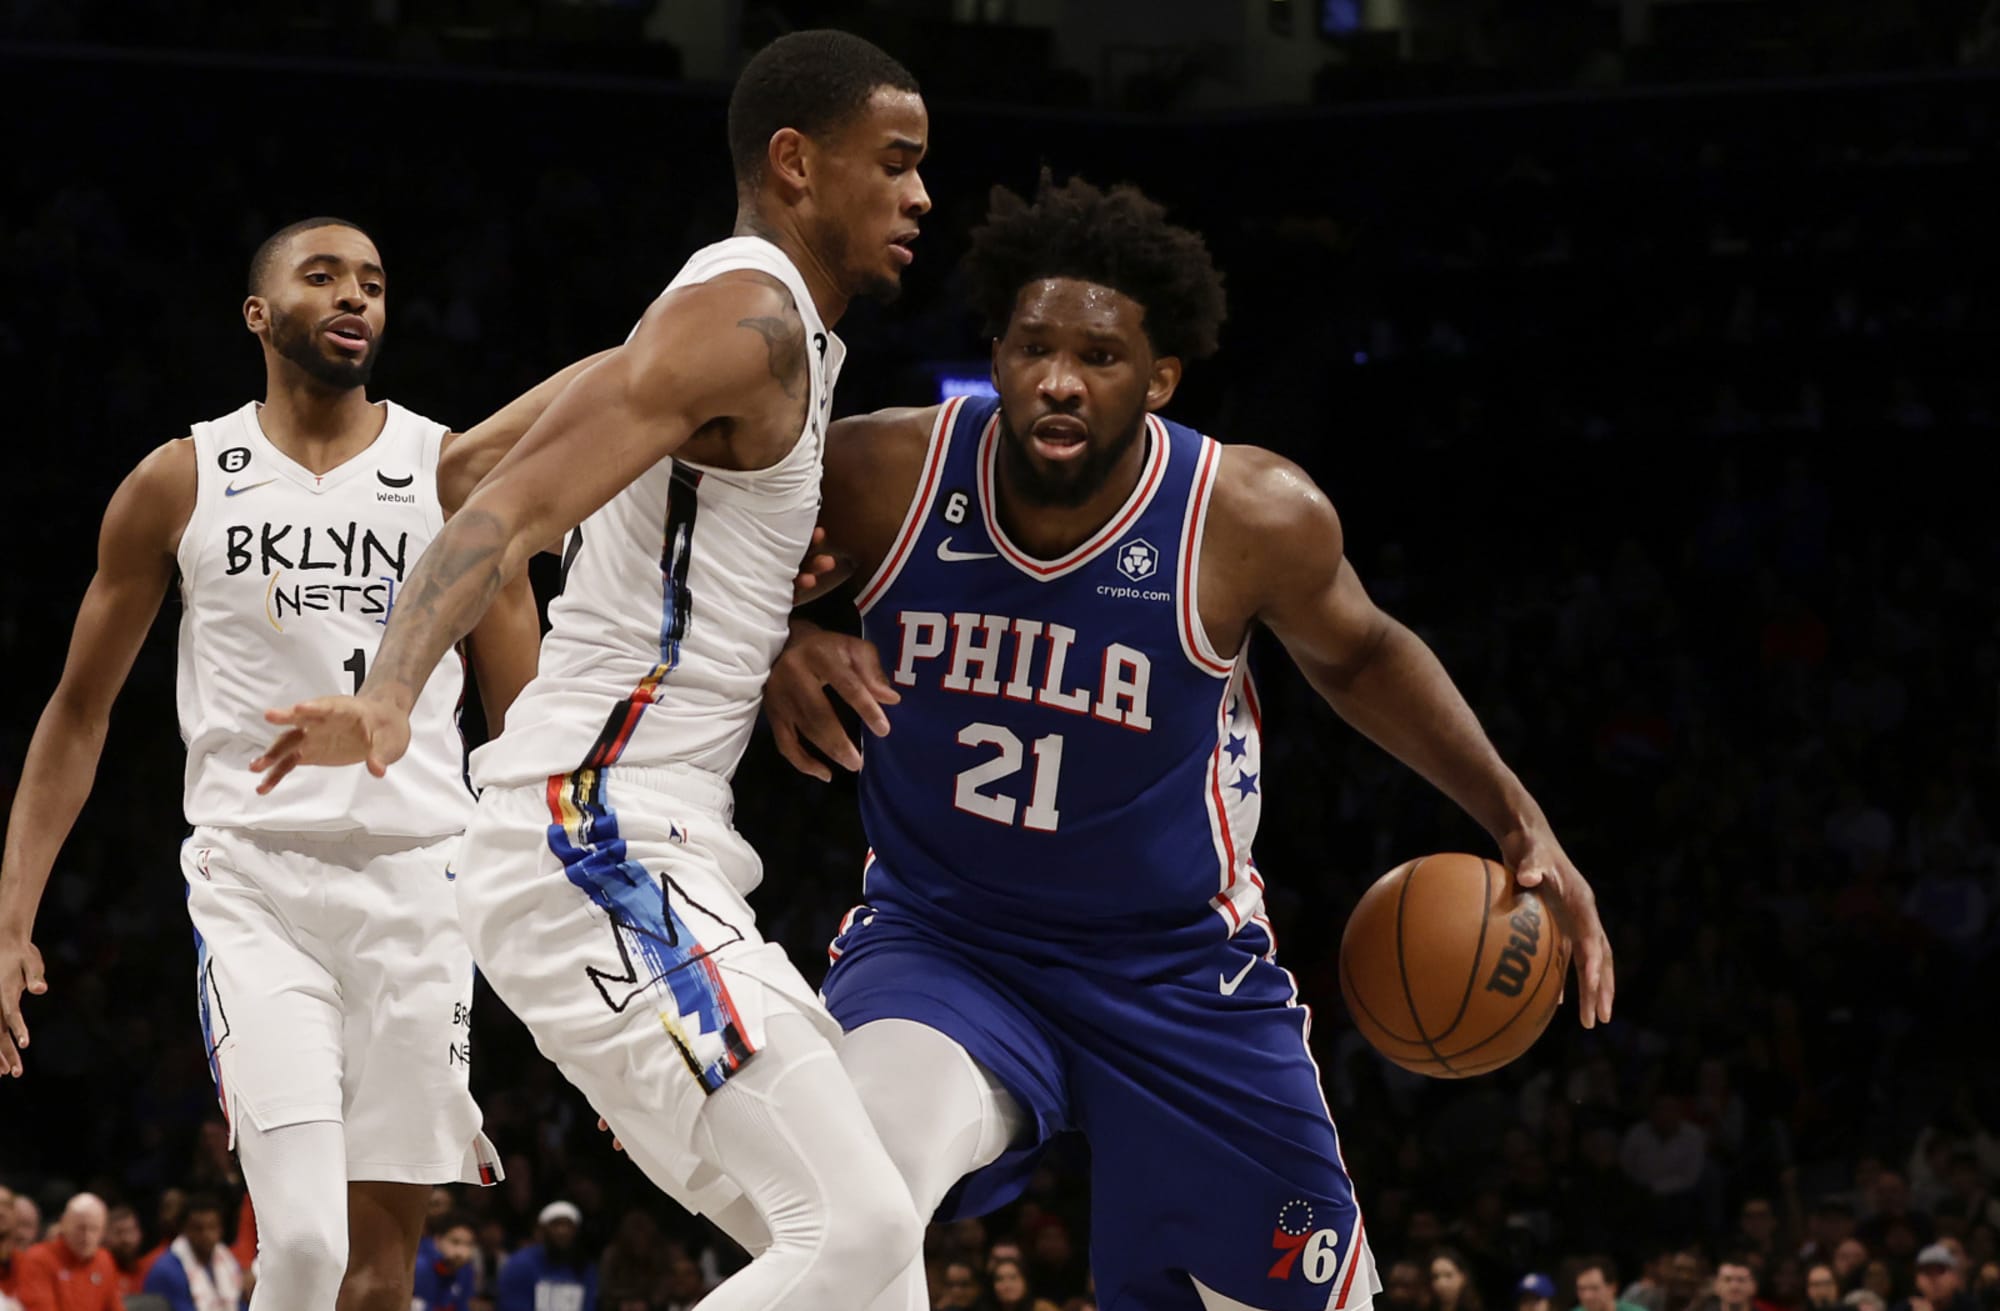 Sixers fend off Nets in tense matchup, win 6th straight